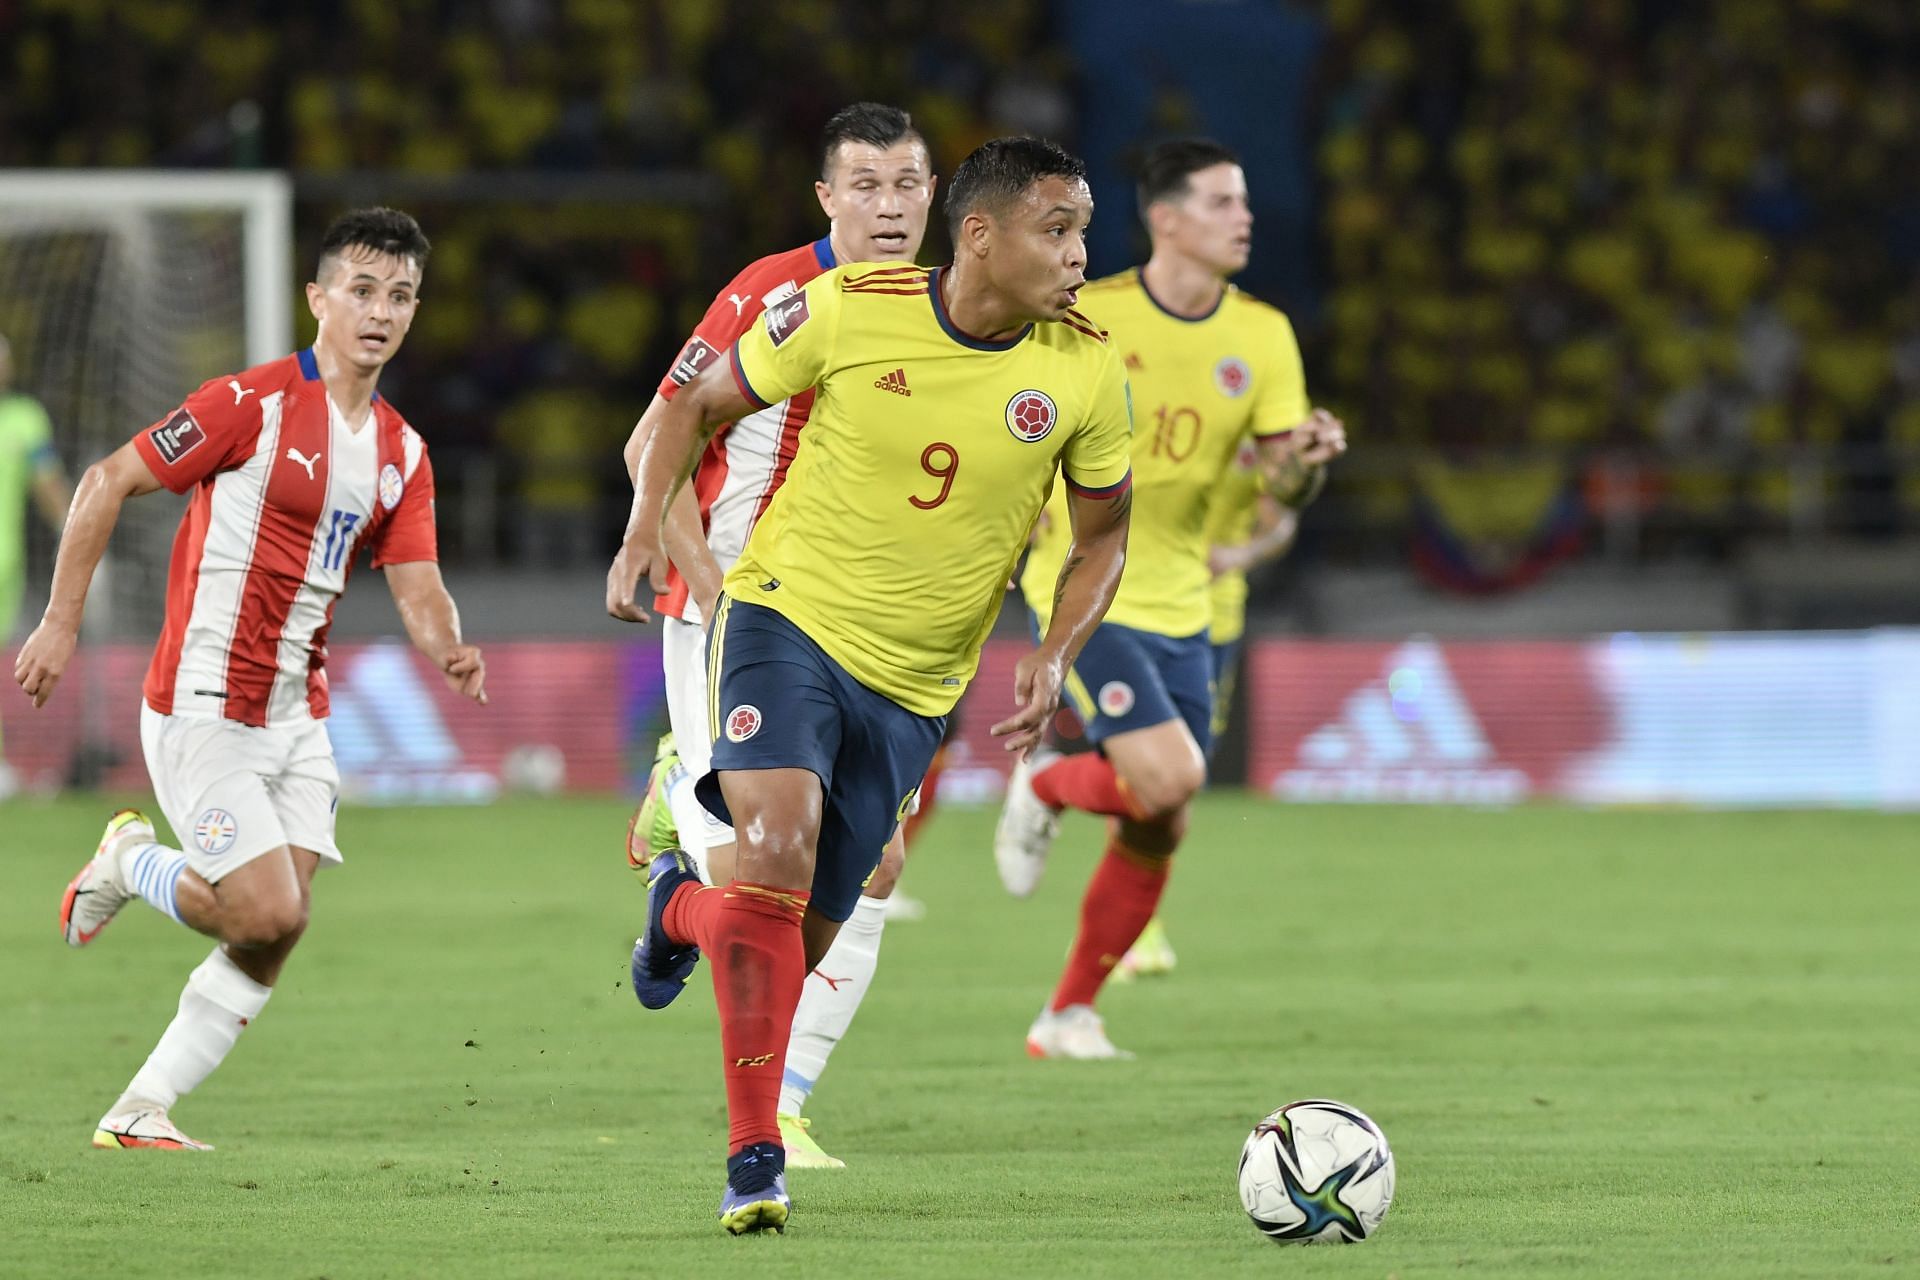 Colombia and Honduras meet in a friendly fixture on Sunday